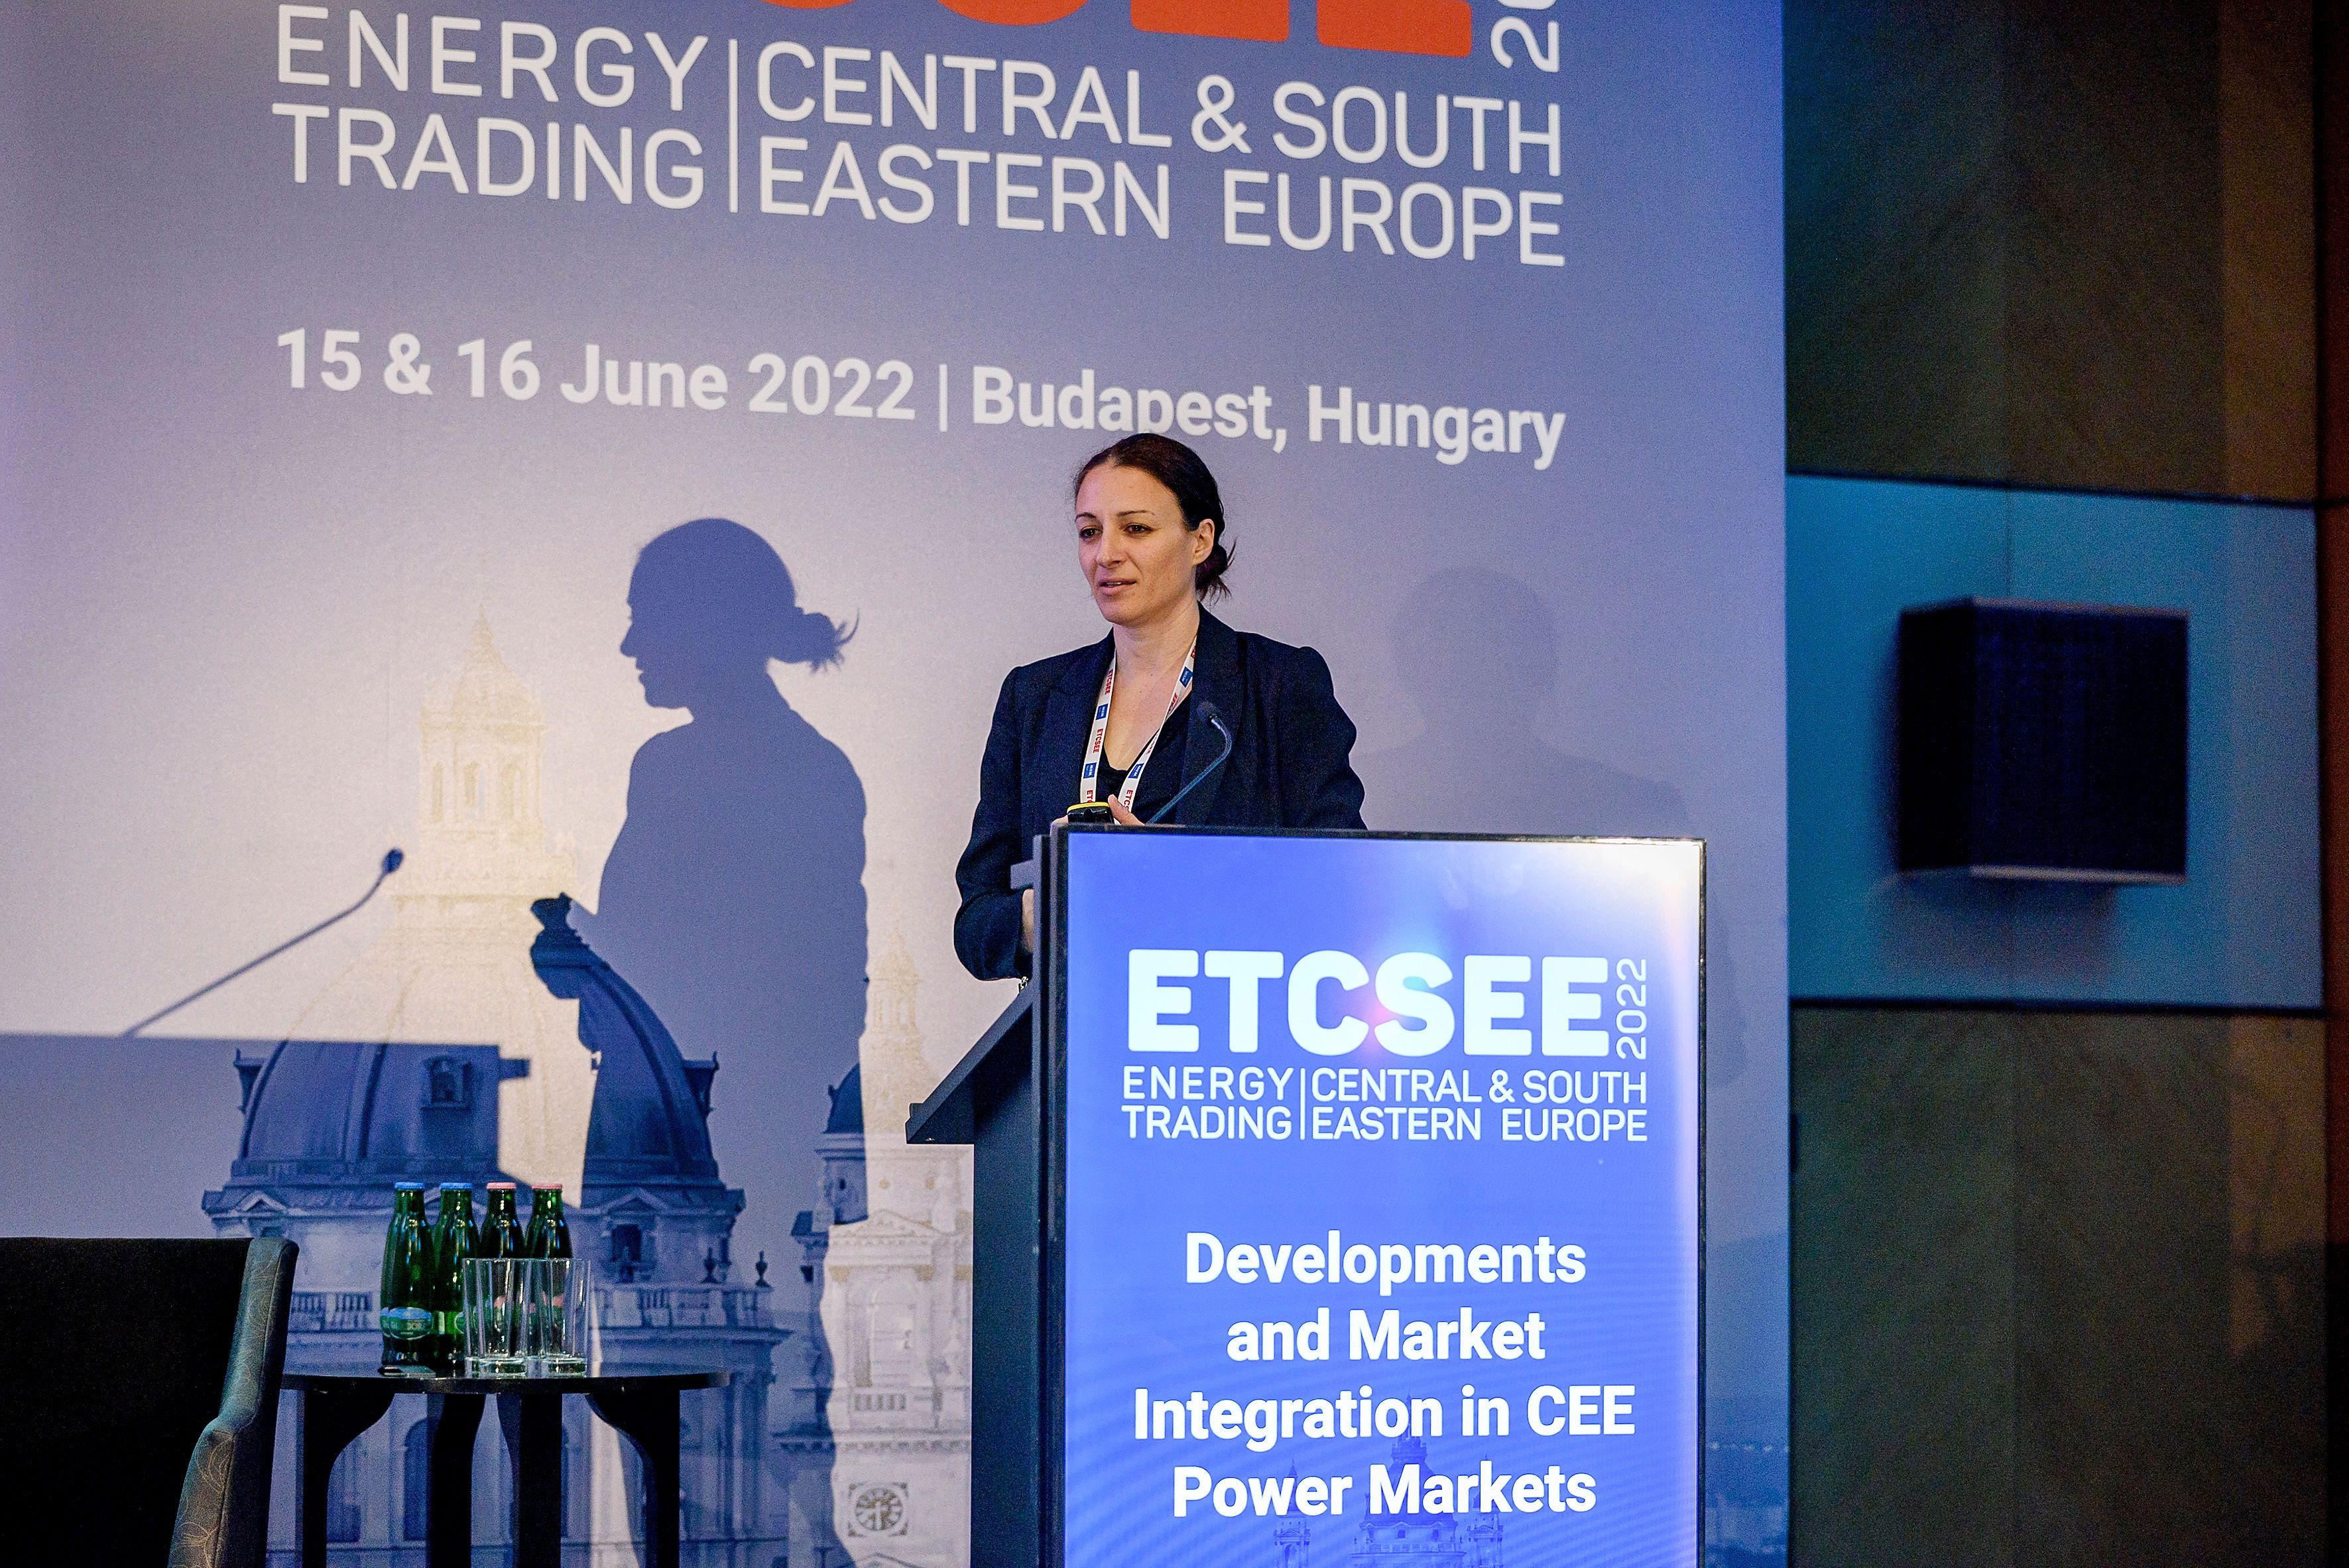 CSEE’s leading meeting point for energy traders